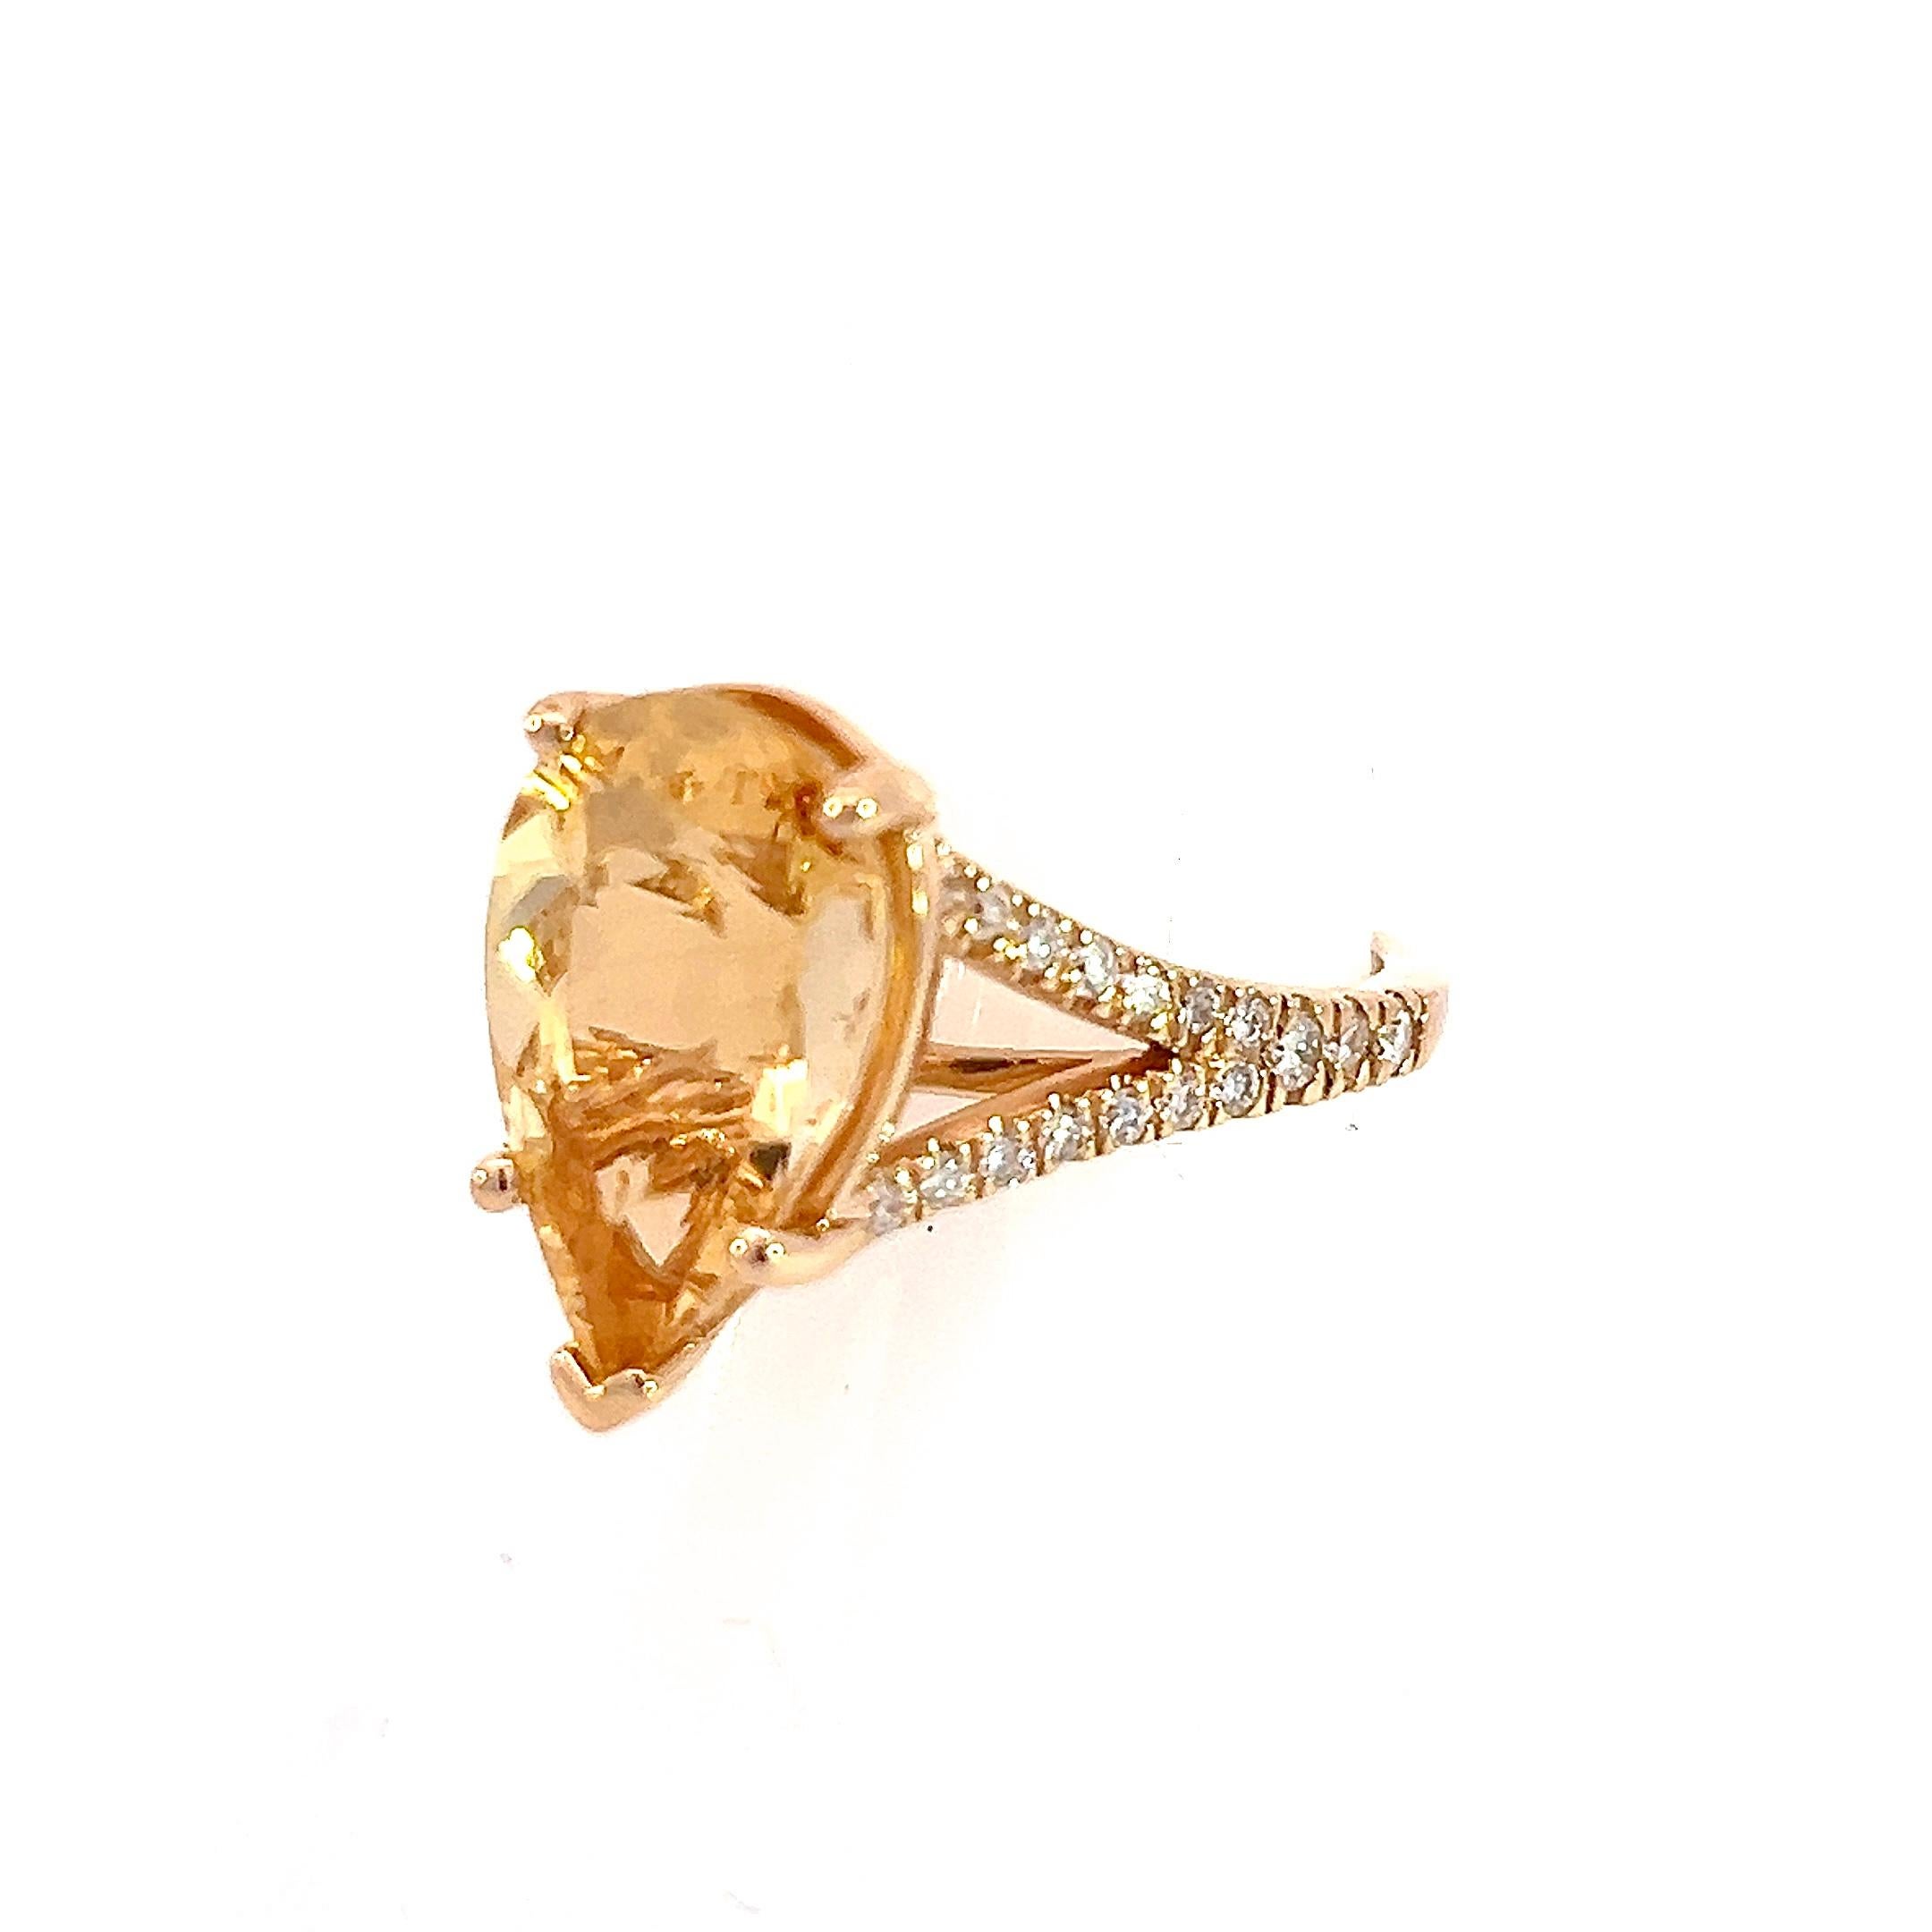 Natural Citrine Diamond Ring 6.5 14k Y Gold 4.79 TCW Certified For Sale 3